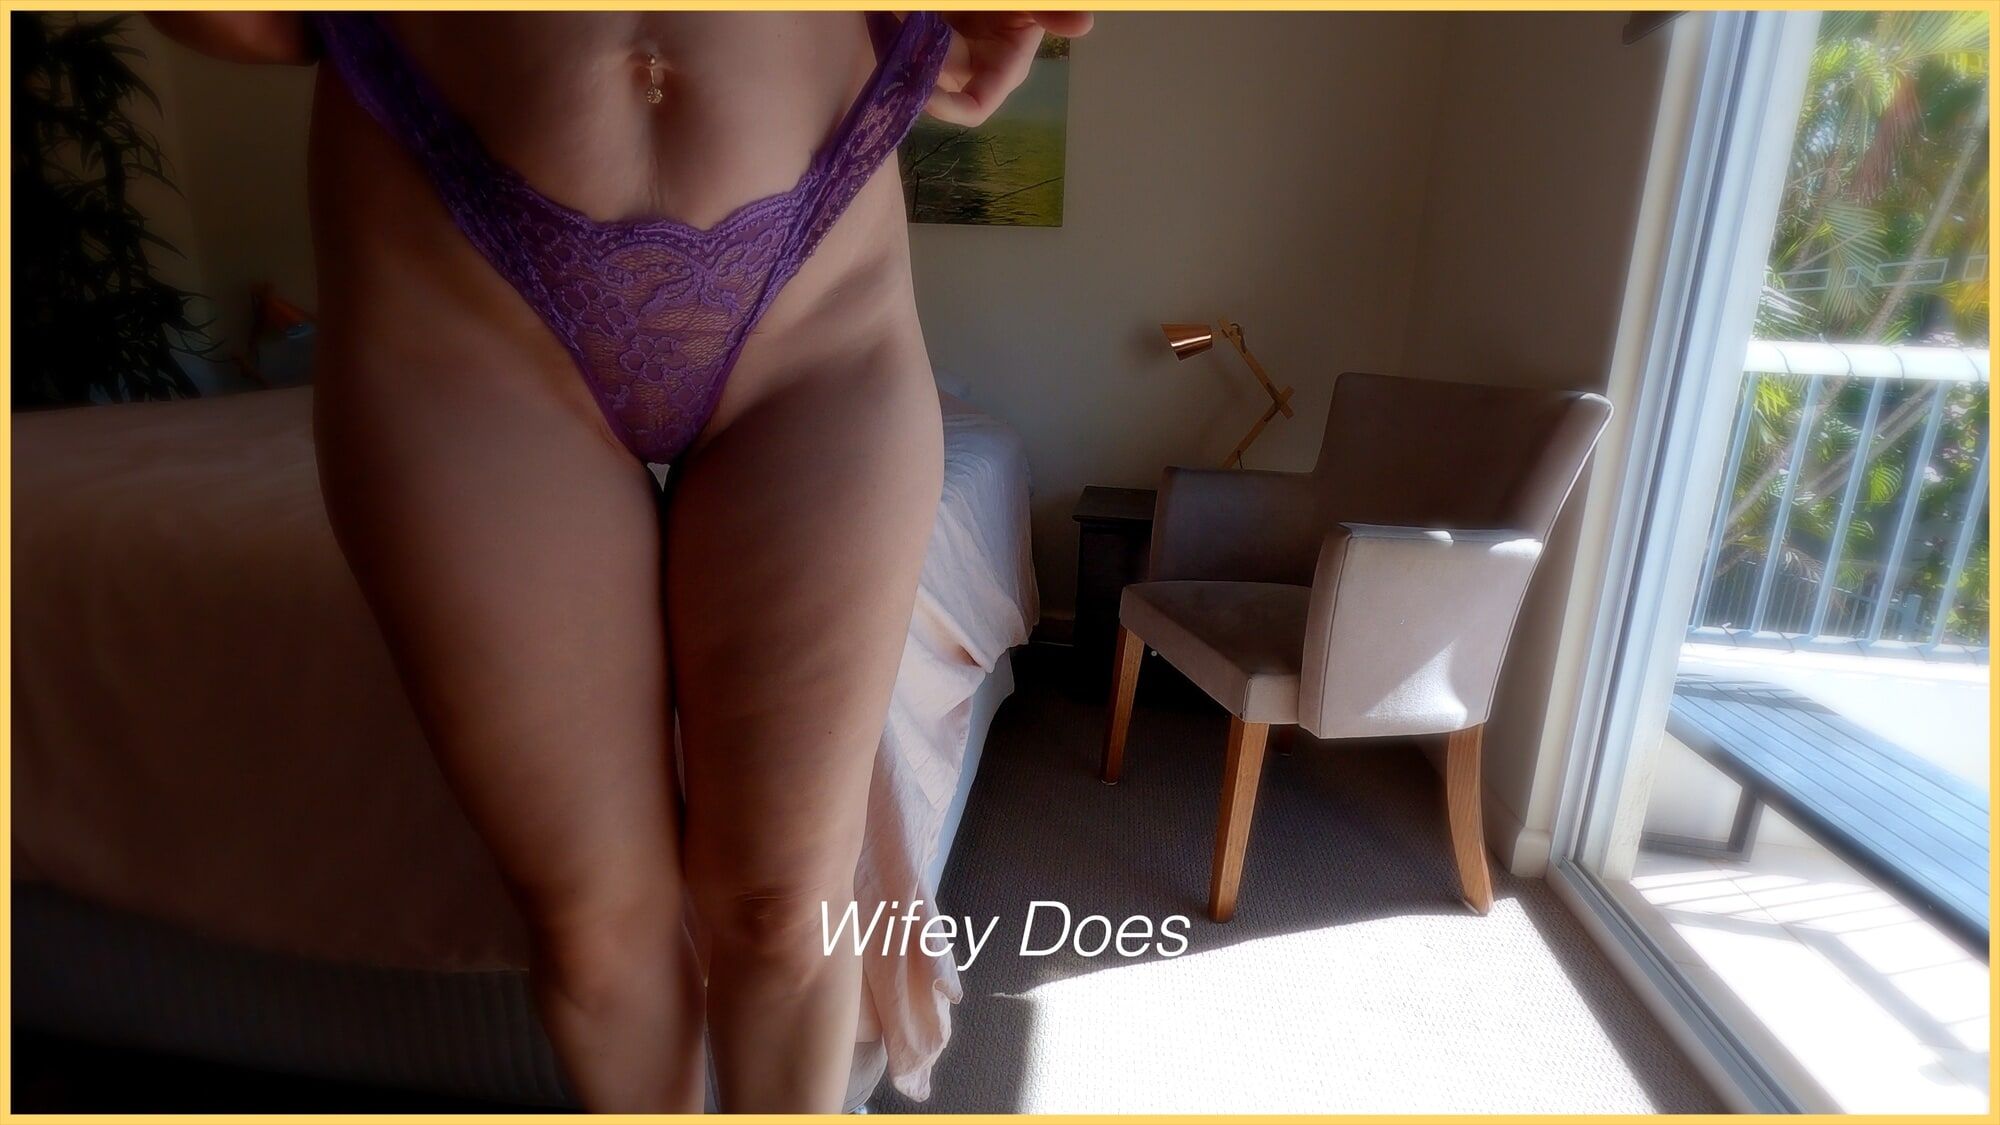 Wifey tries on different panties for your enjoyment #2